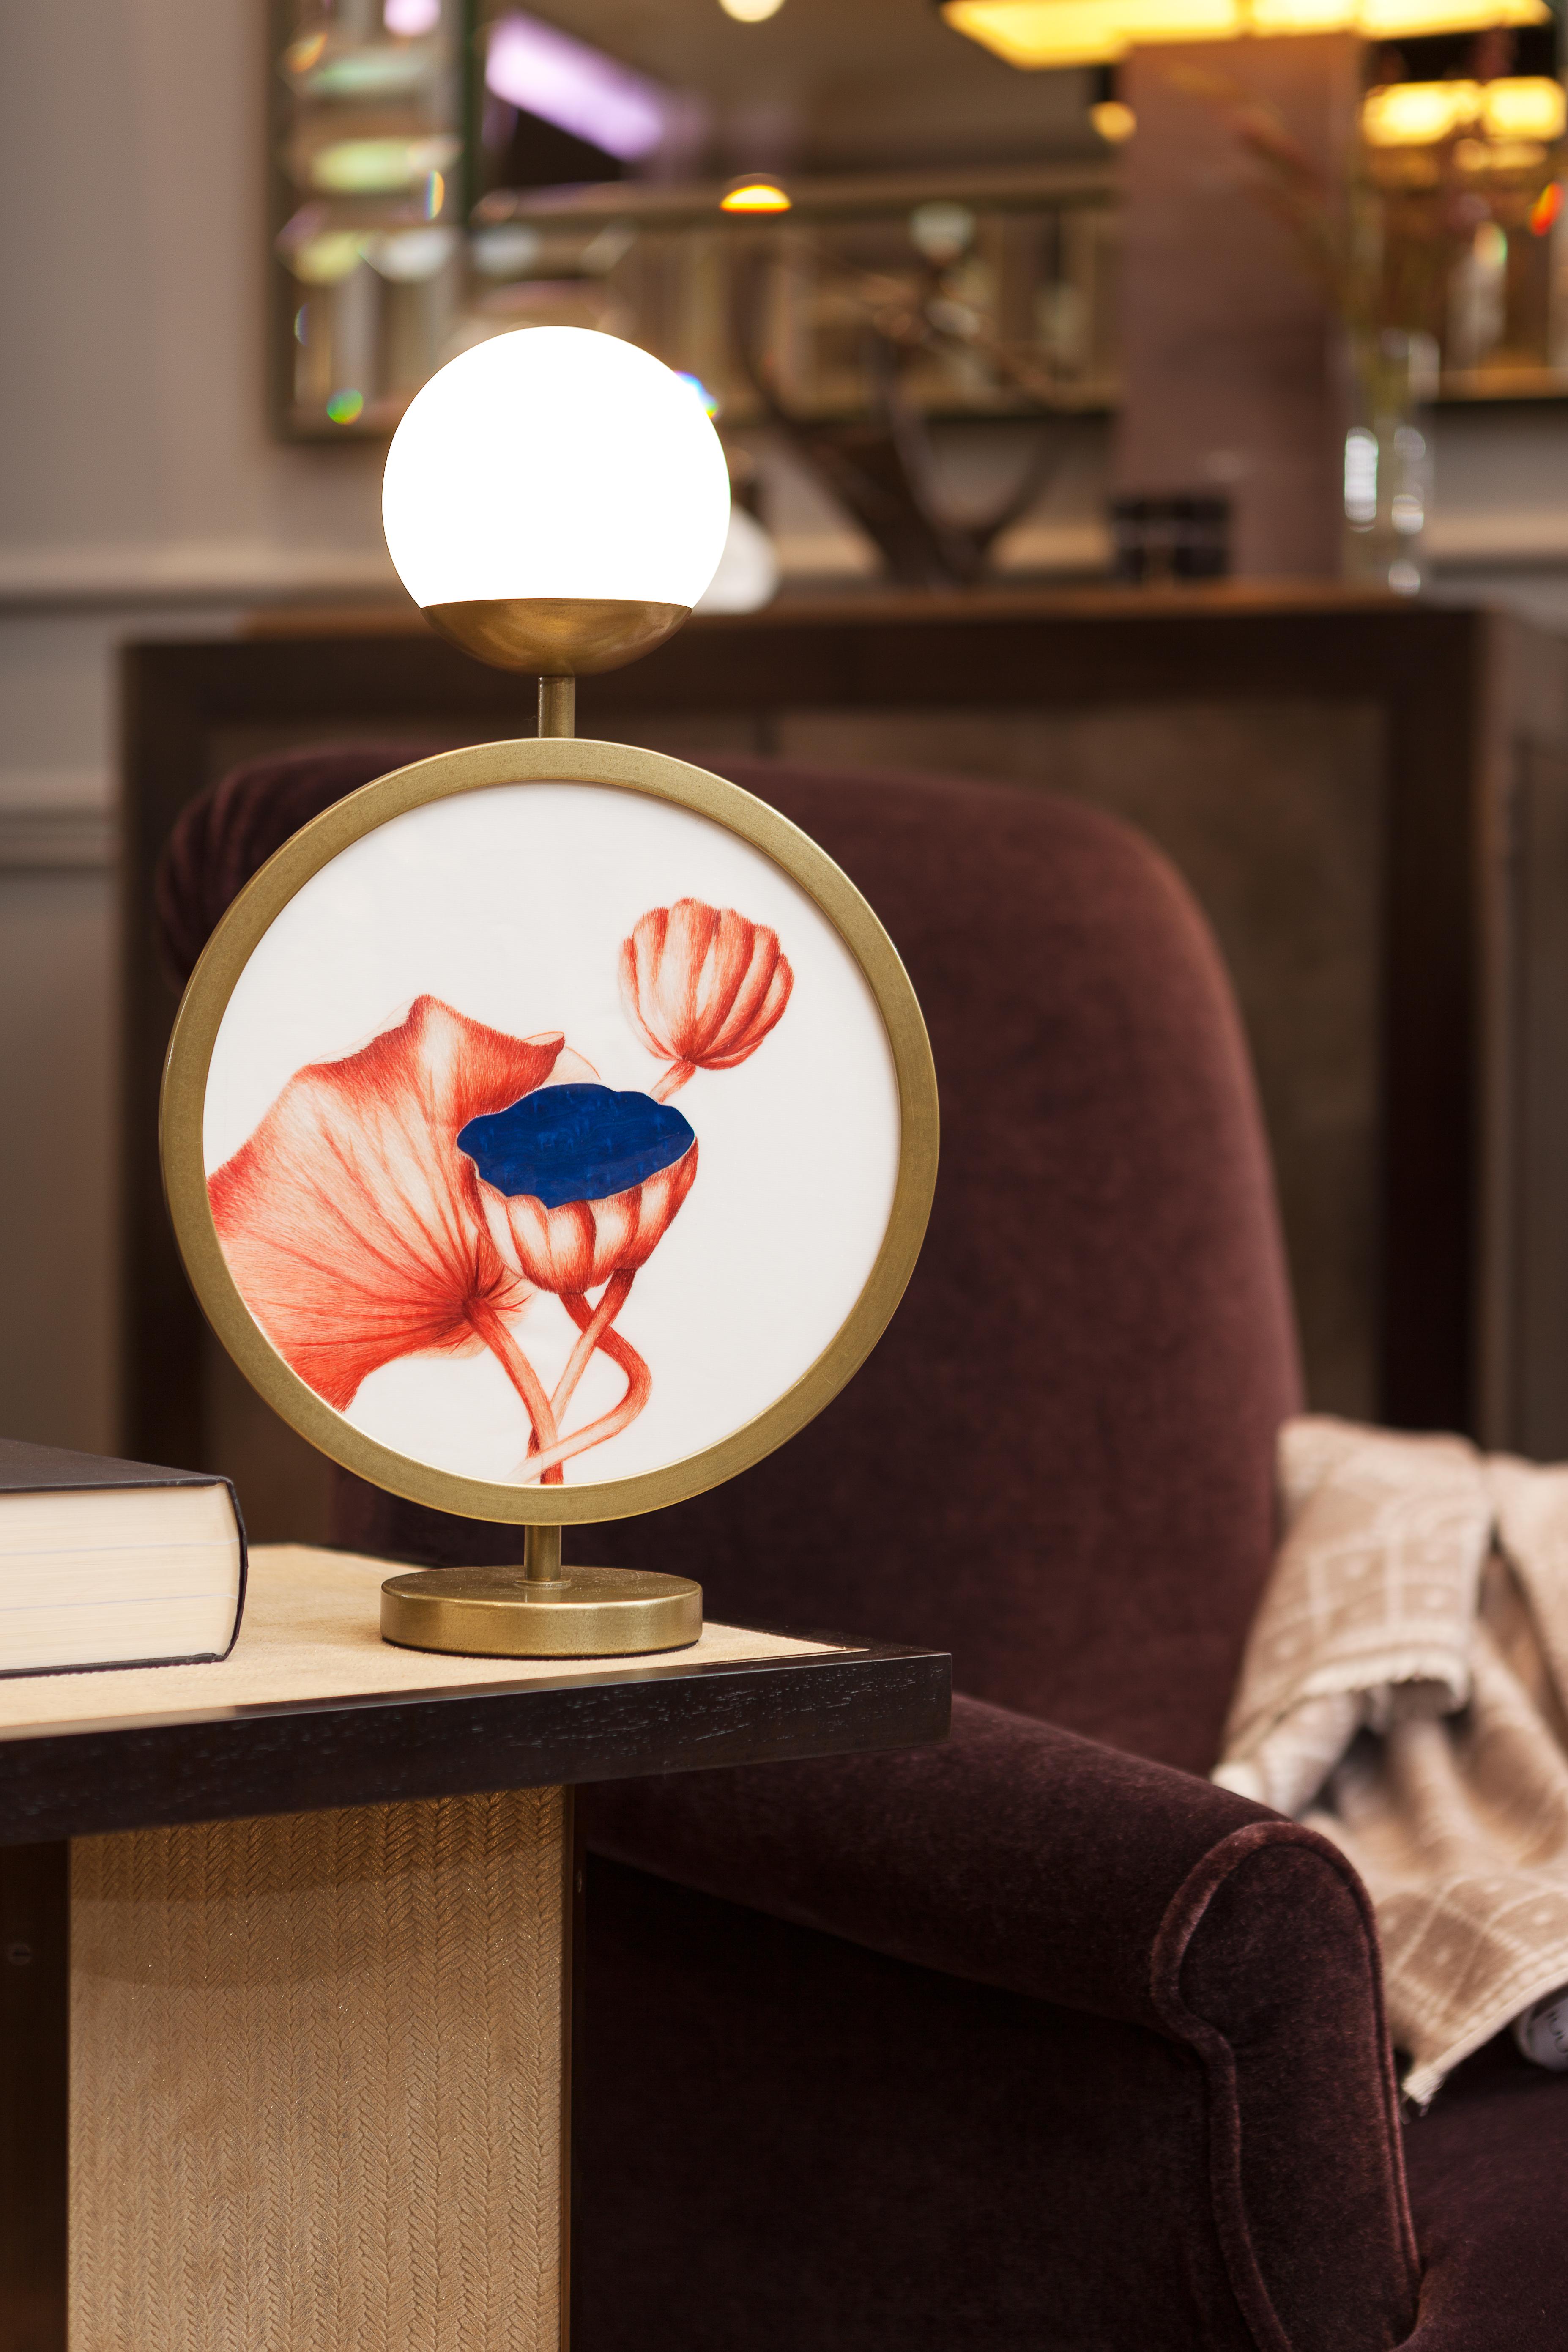 The intricate embroidery features a visualised Chinese proverb, “The lotus root may be severed, but its fibered threads are still connected.” This expression is used to describe how important family ties are, the lamp is exquisitely adorned with a